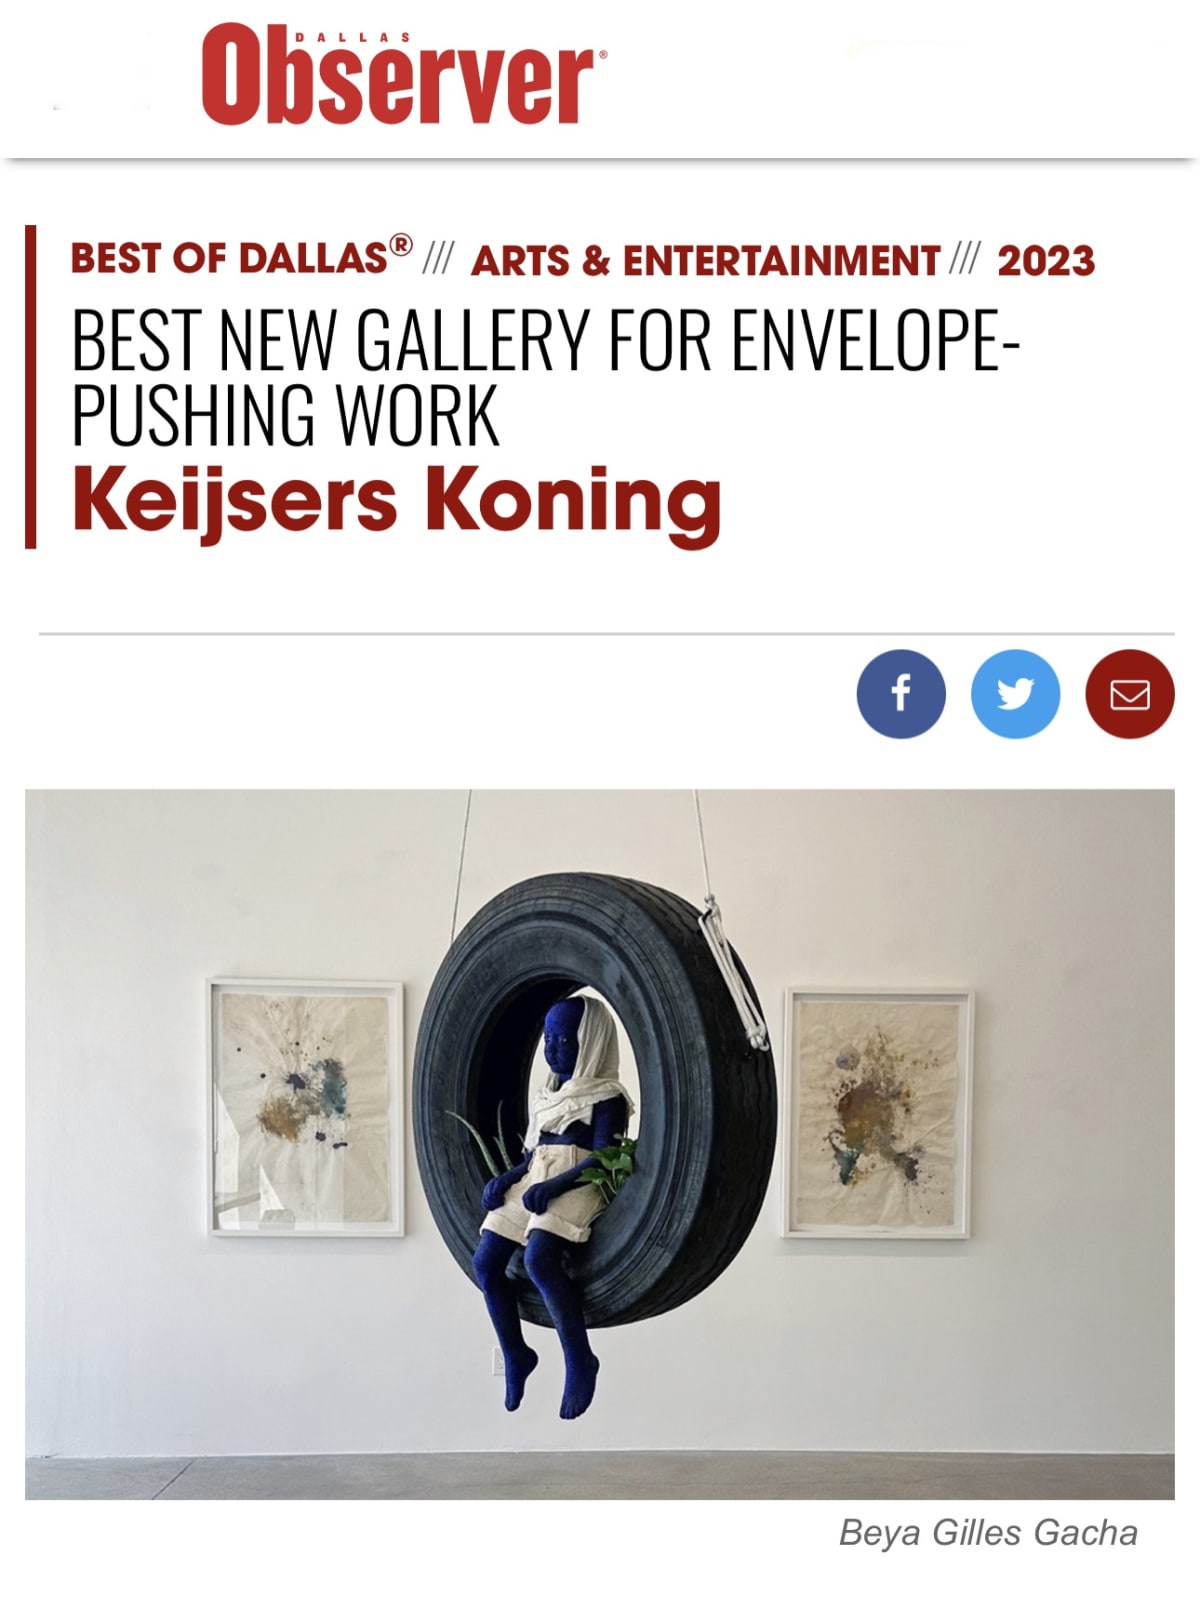 article front page of Dallas Observer with Gallery installation view